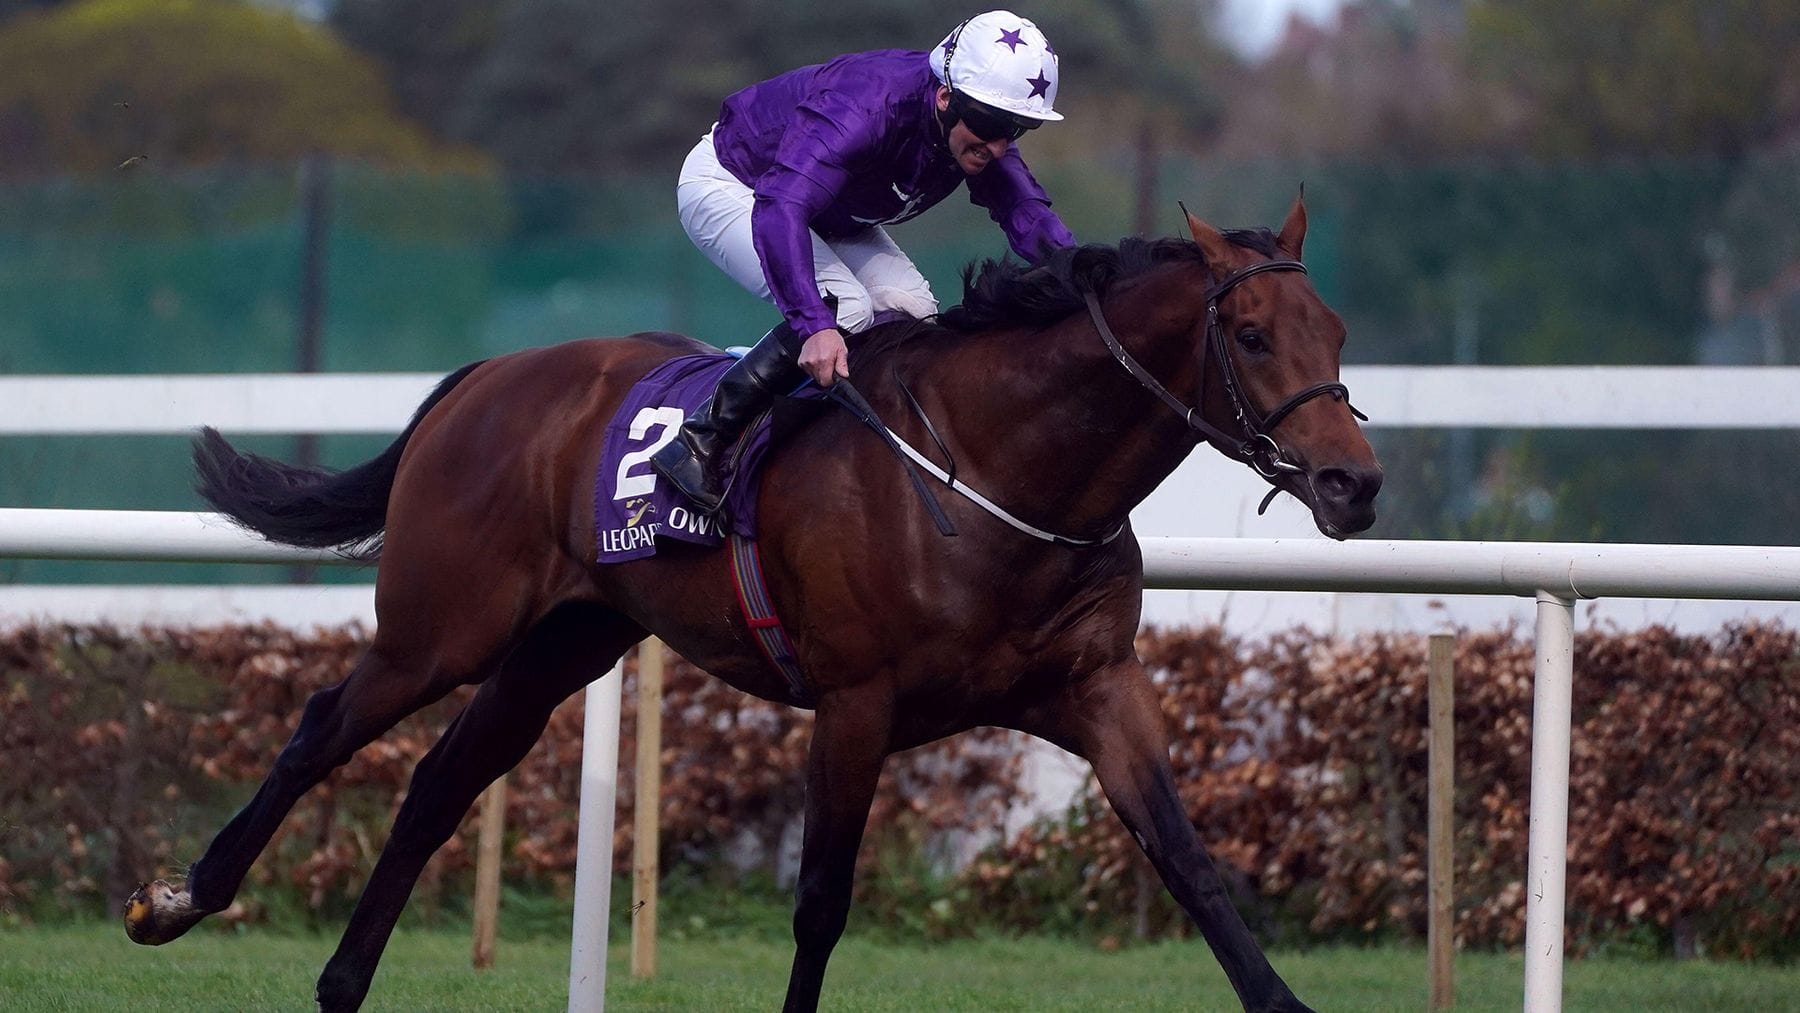 Ballydoyle's Battle Cry goes from last to first